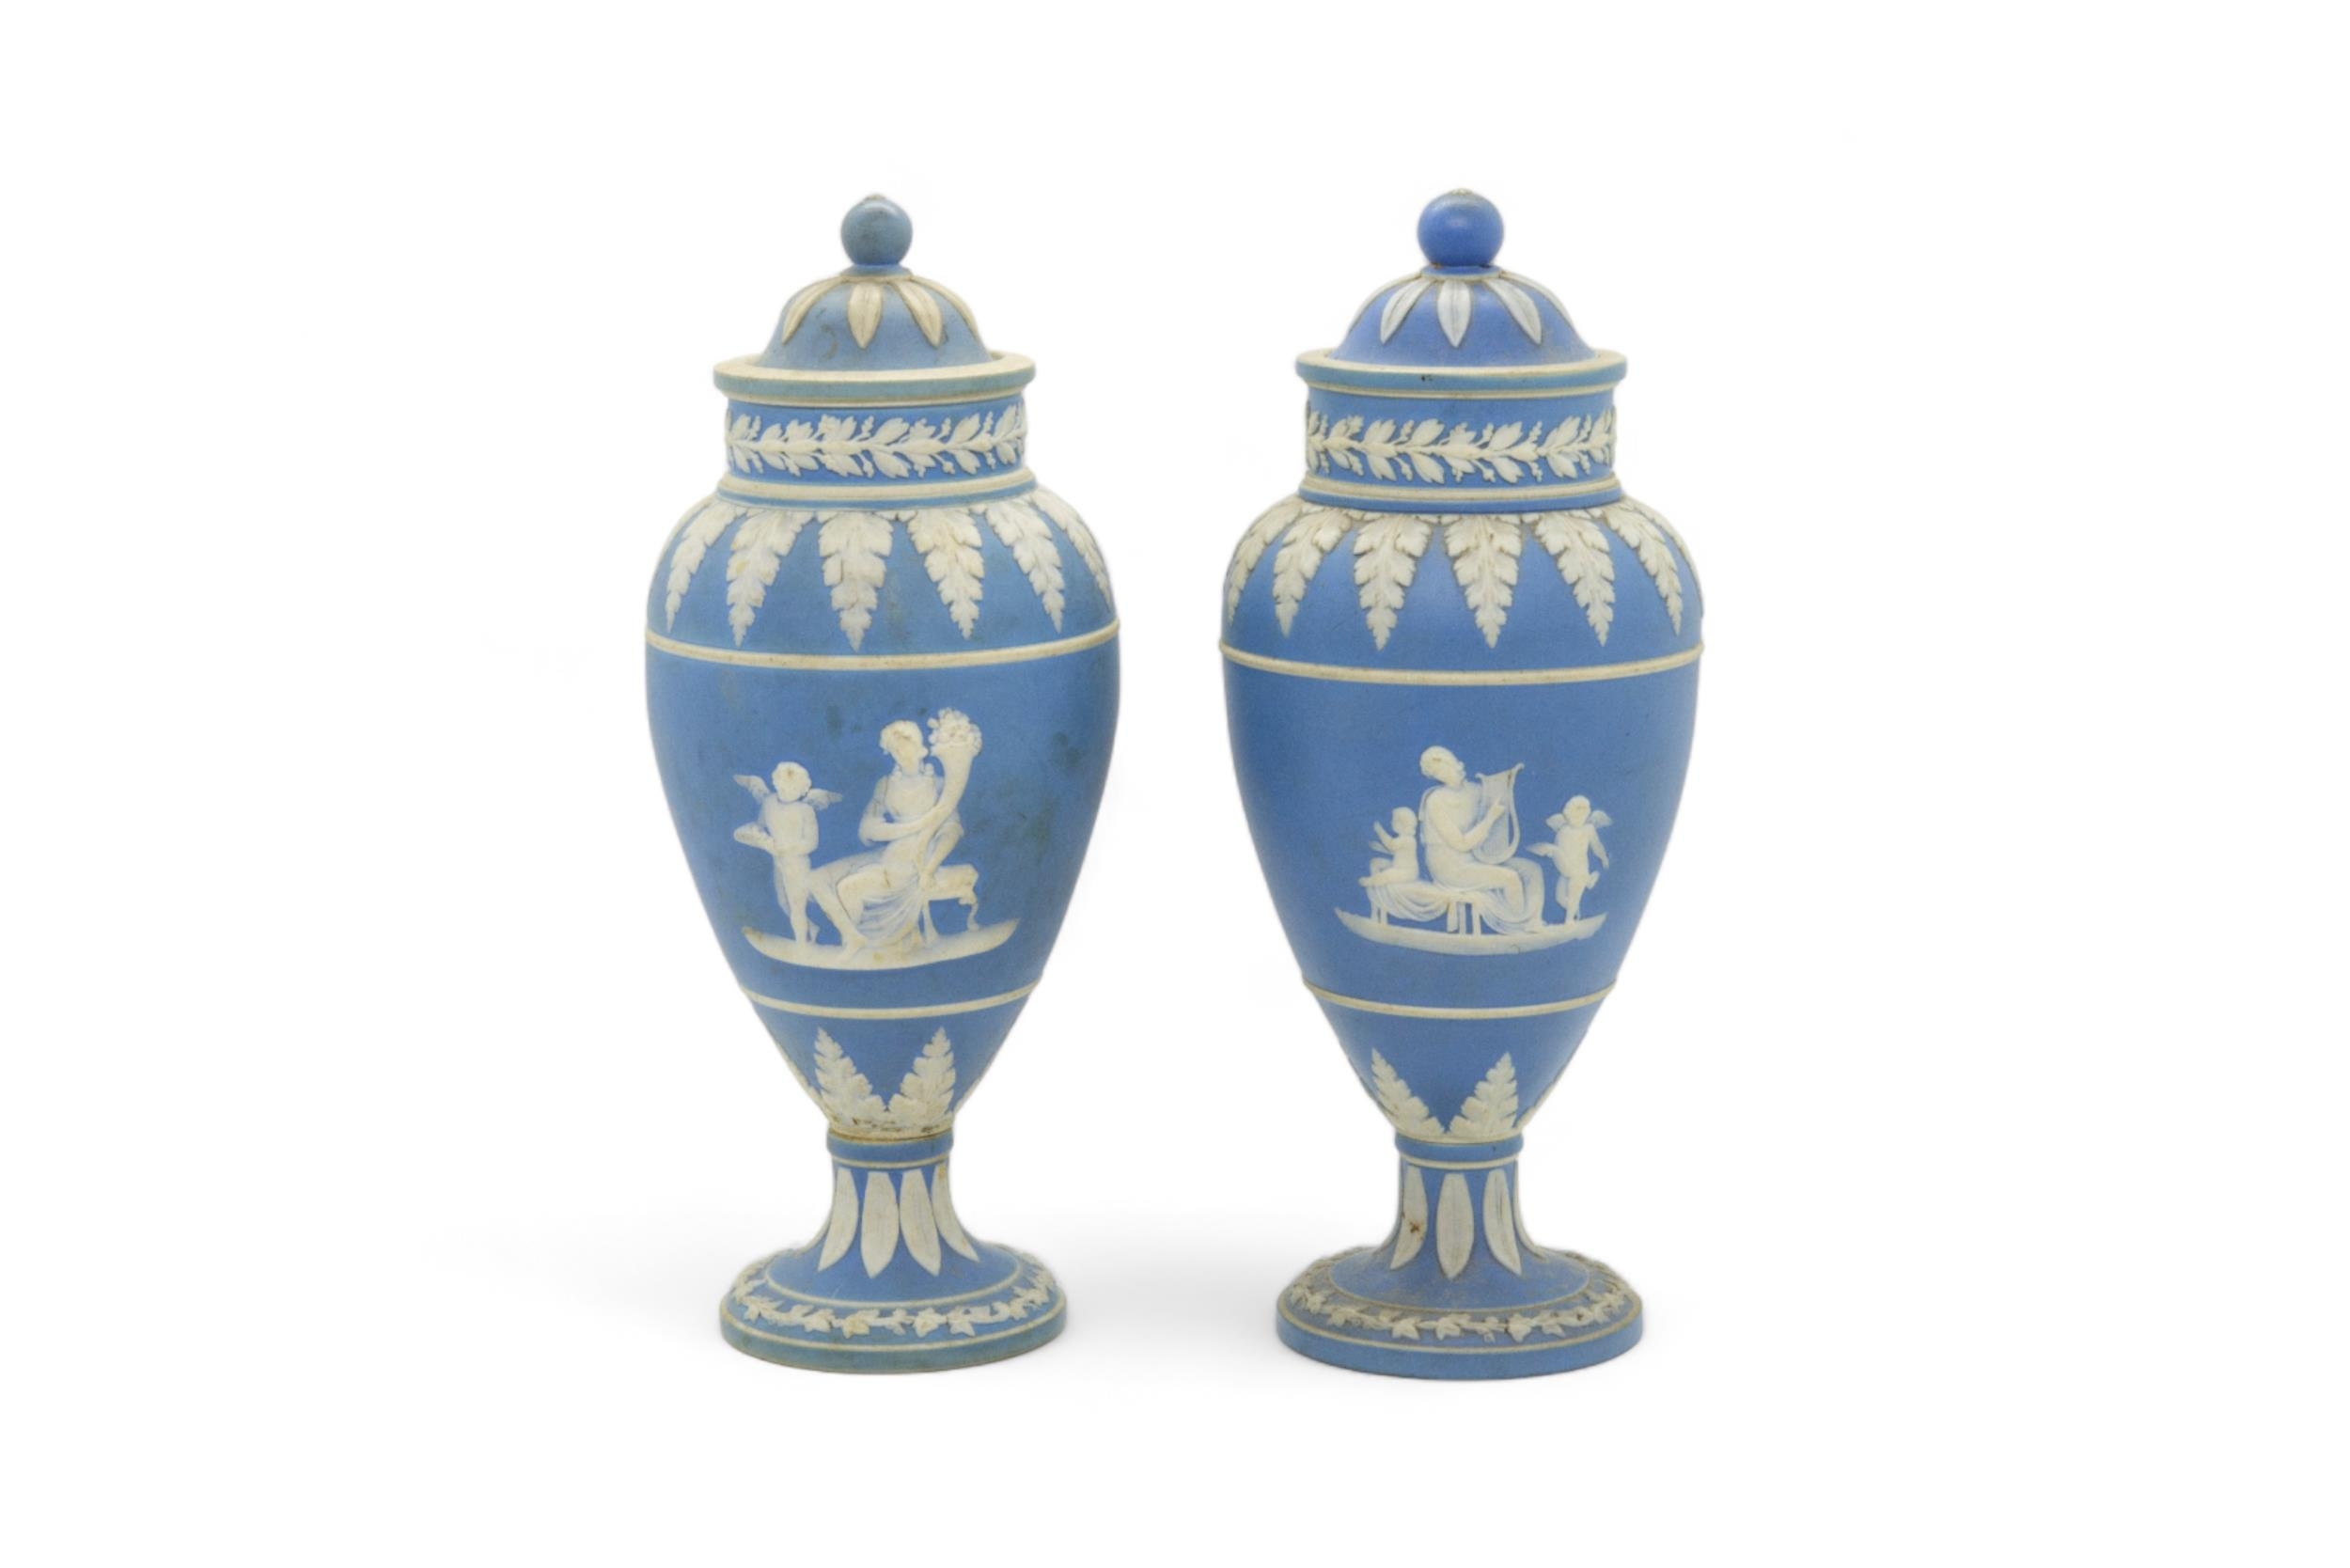 A PAIR OF WEDGWOOD JASPER CASSOLETTE Late 18th century, together with the base of a cassolette and - Image 5 of 6